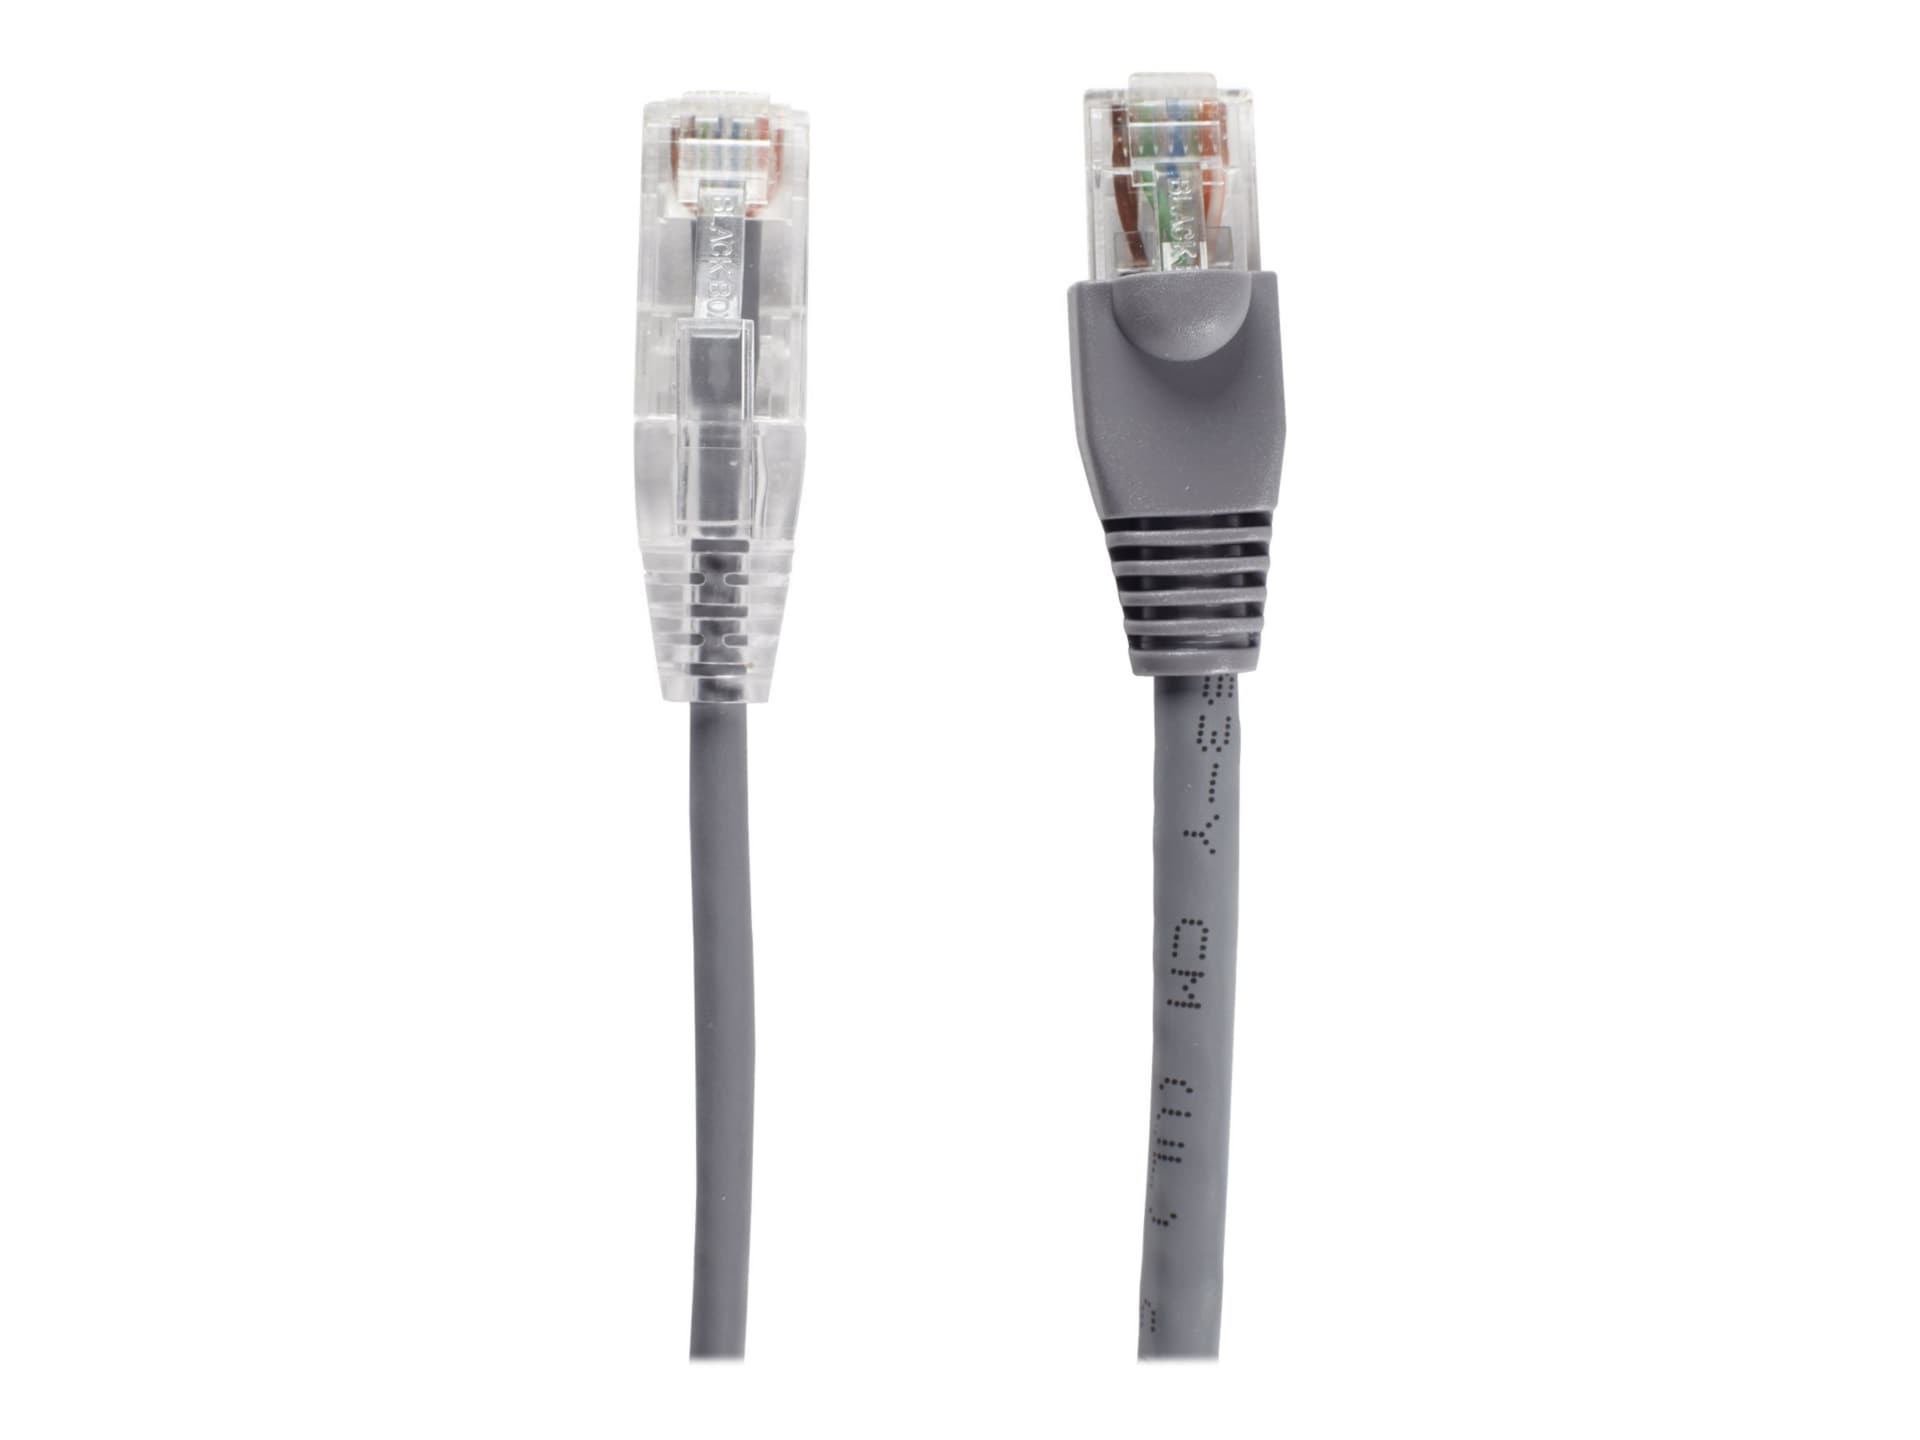 Black Box Slim-Net patch cable - 4 ft - gray